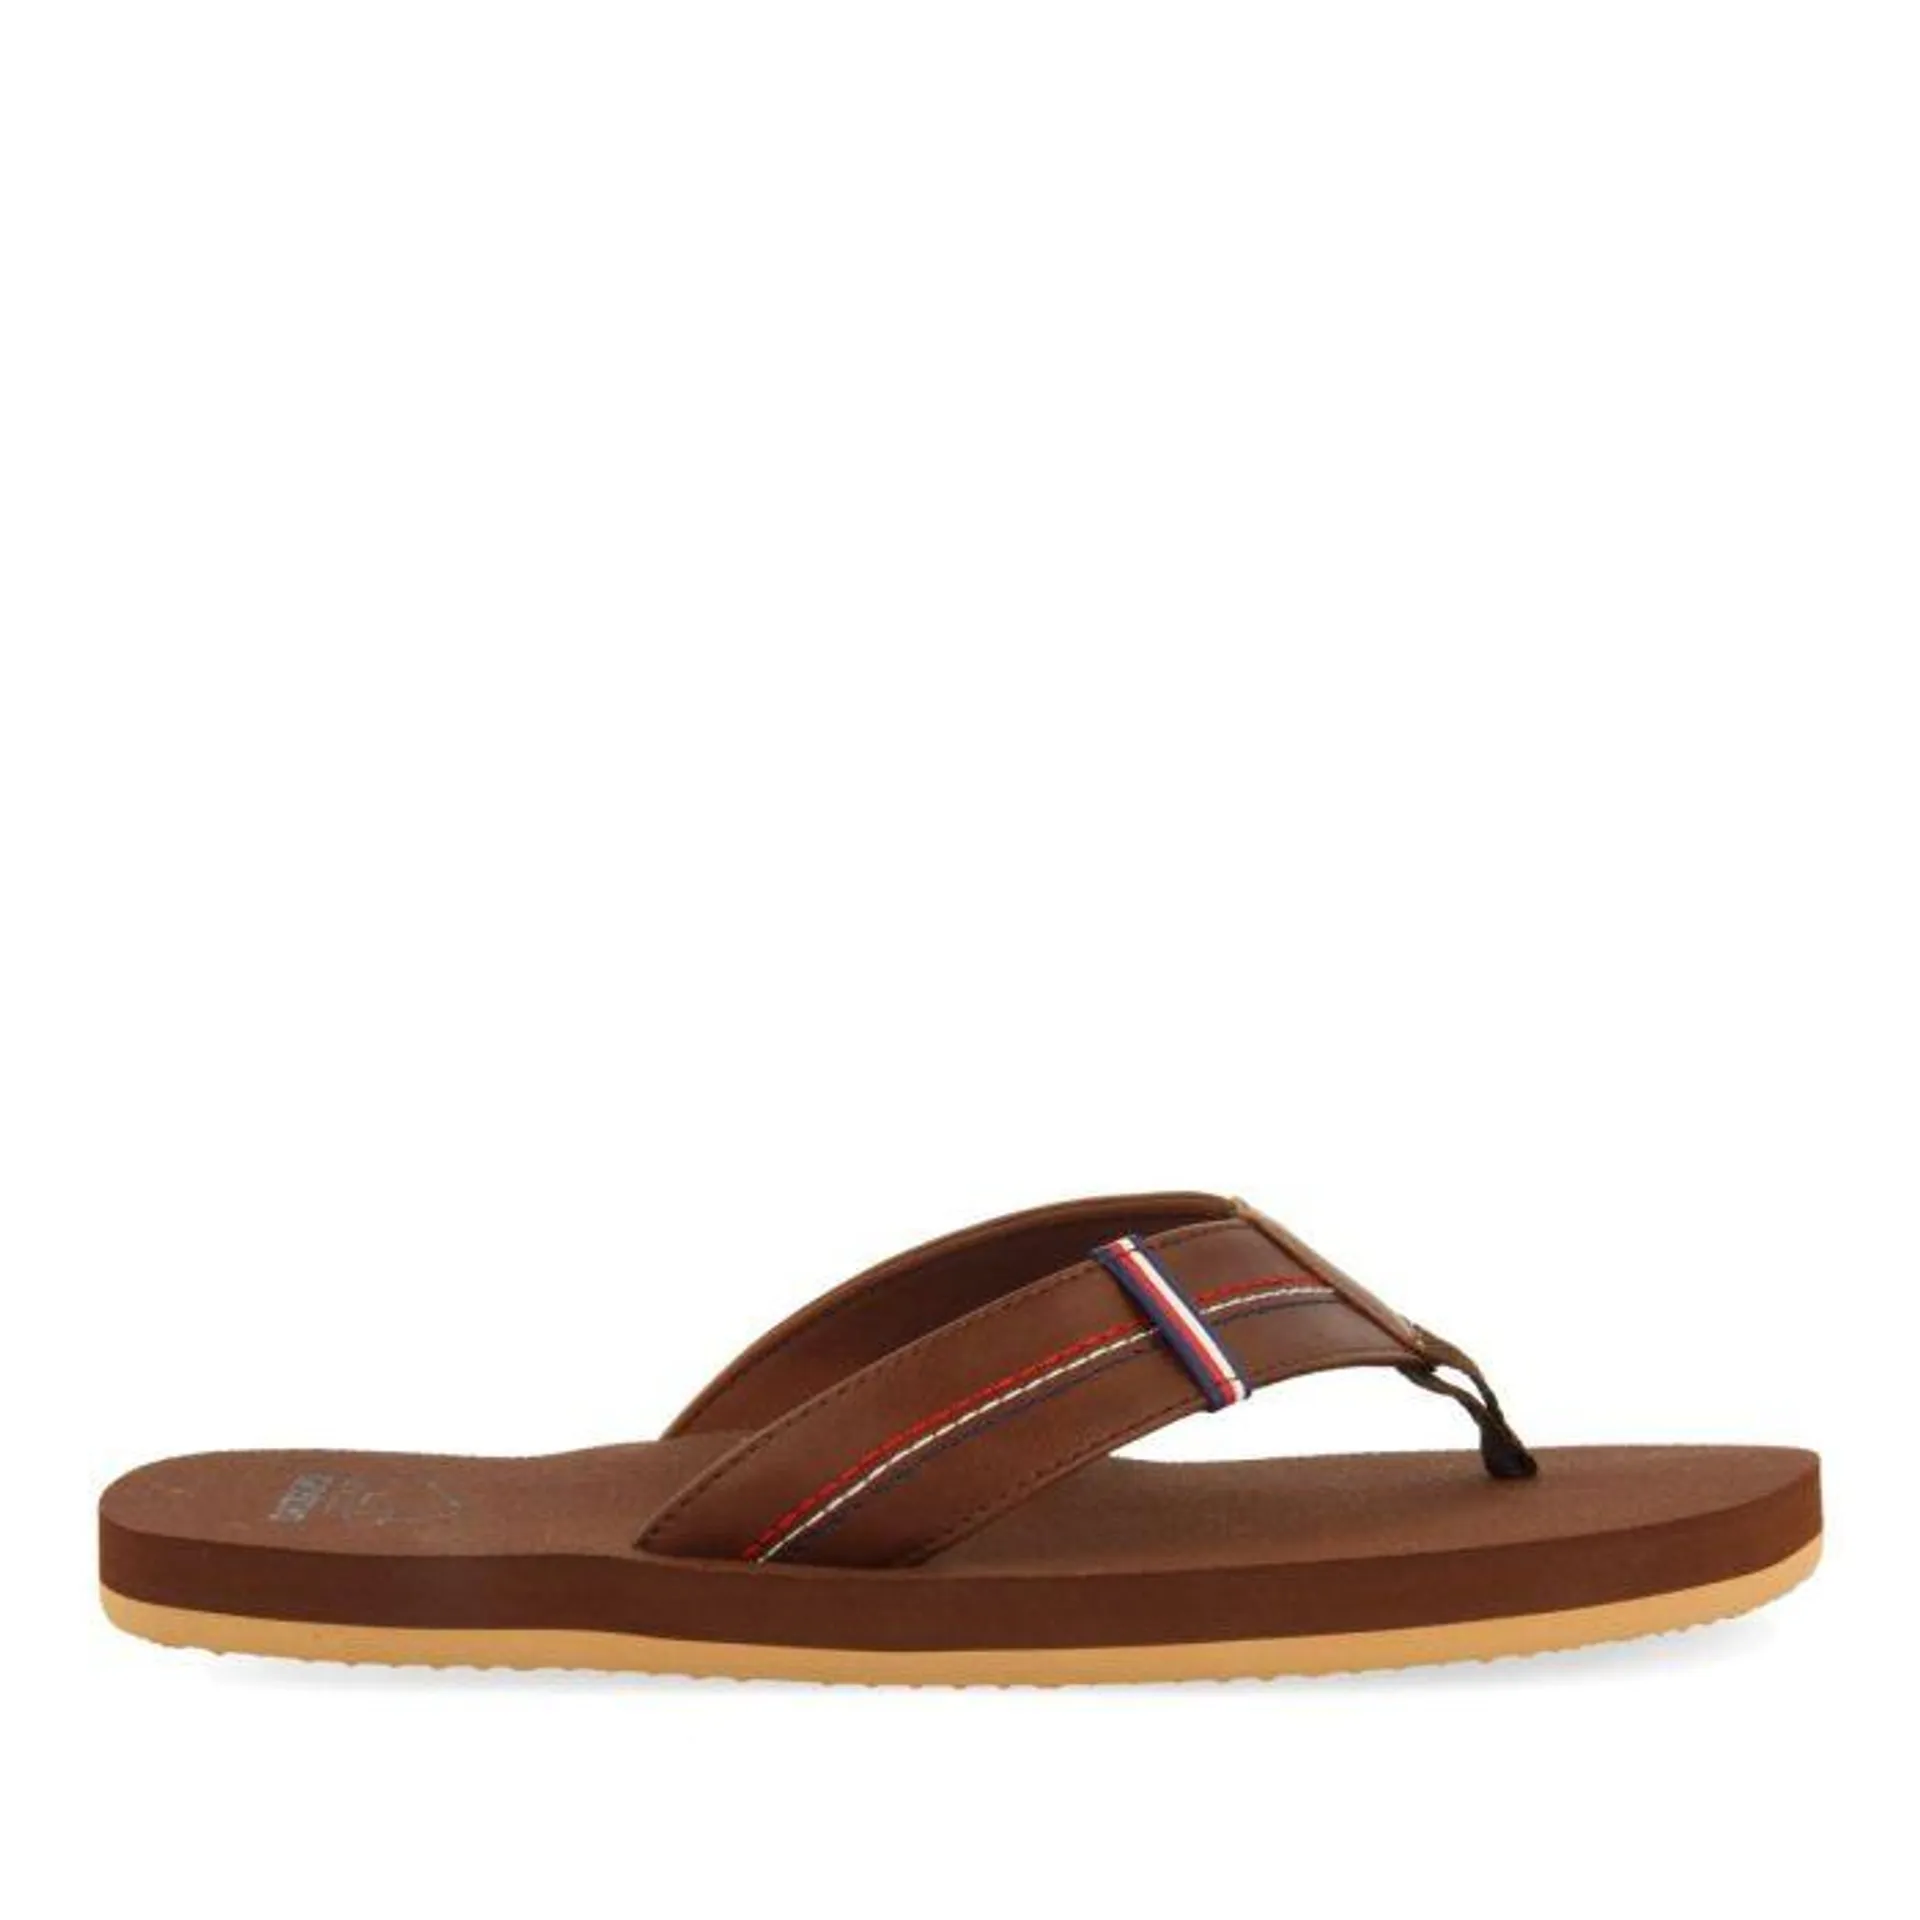 BROWN SANDALS WITH COLORFUL DETAILS FOR MEN CUTLER